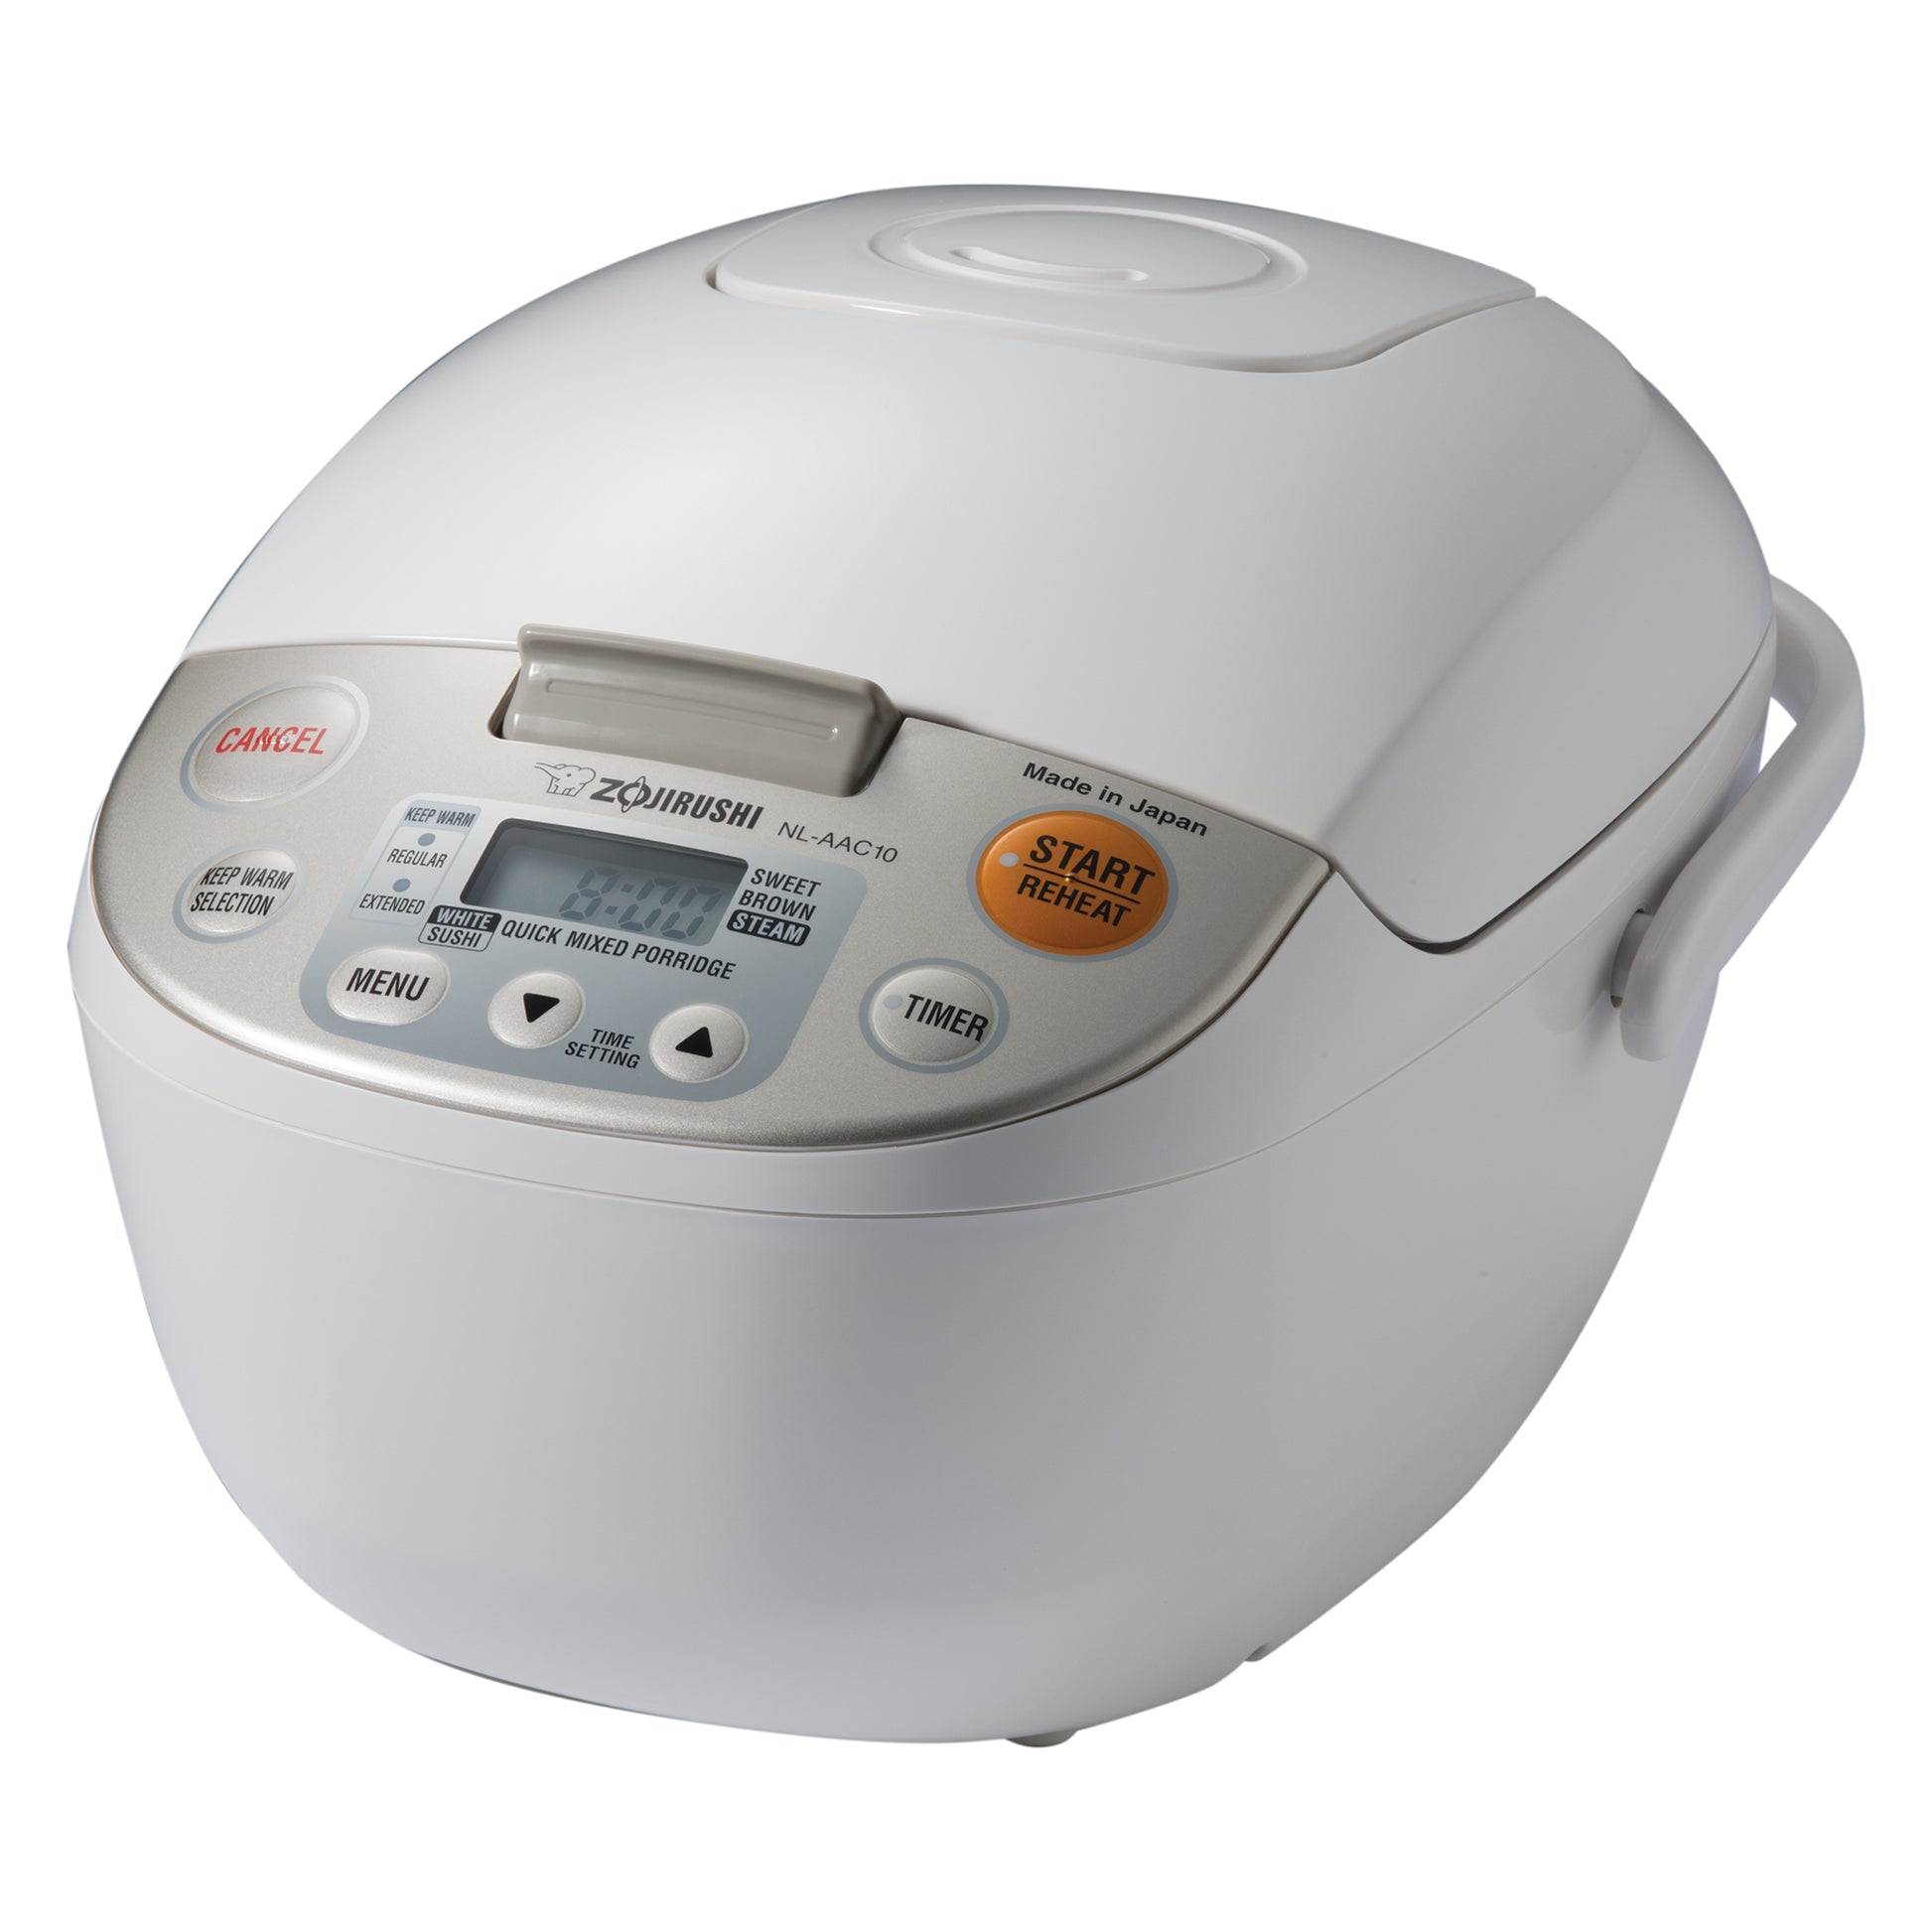 Buy HITACHI RICE COOKER RZ-18B ( 1.8 liter ) at Best Prices Online on